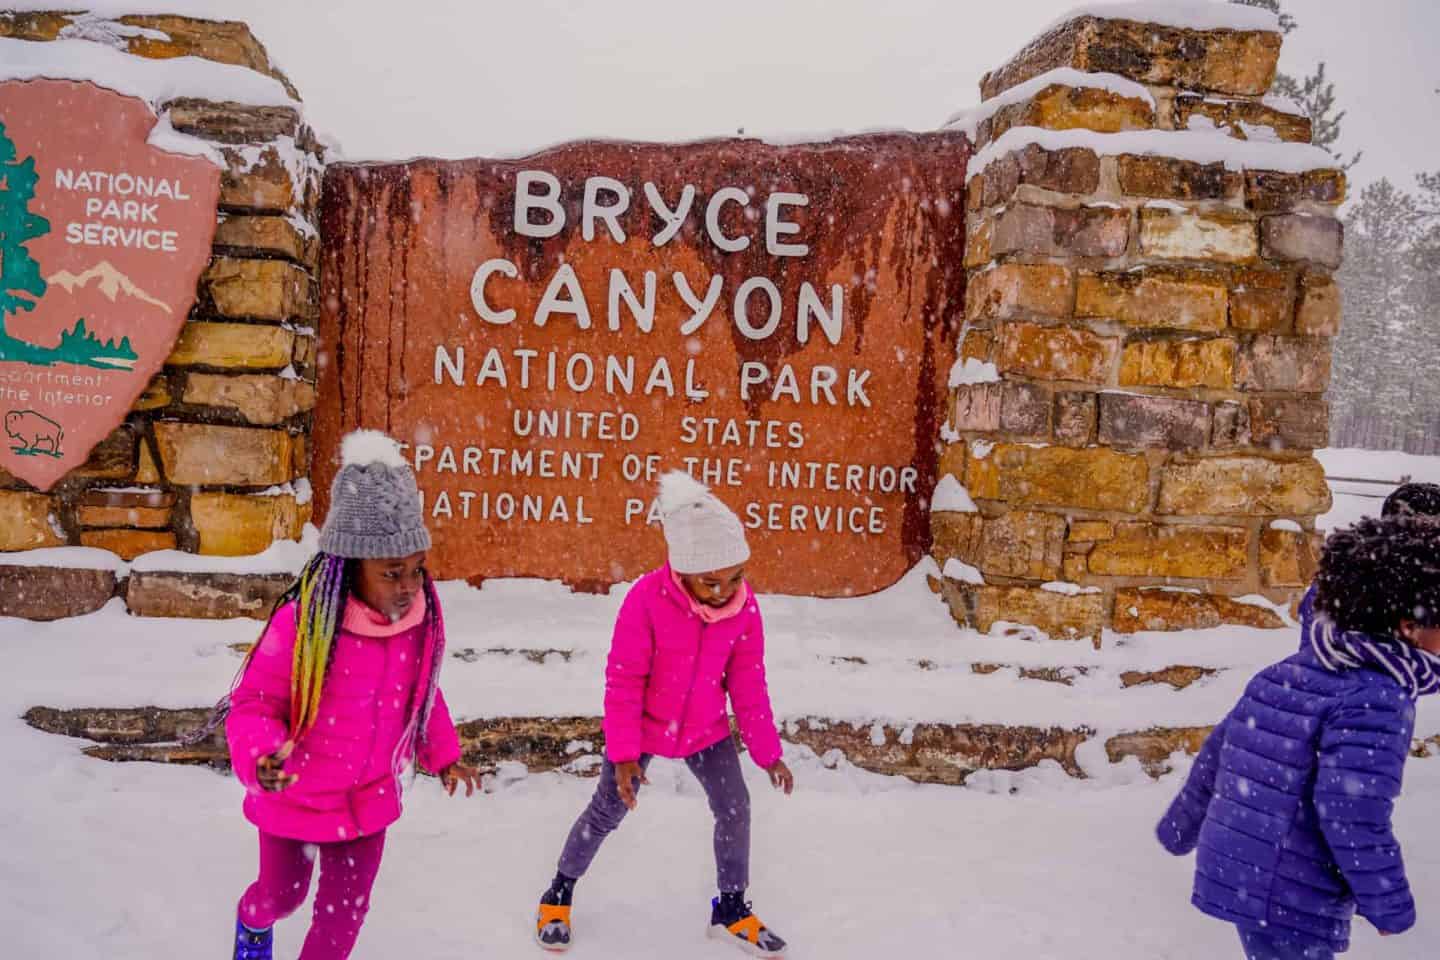 Children playing in front of the Bryce Canyon National Park sign.